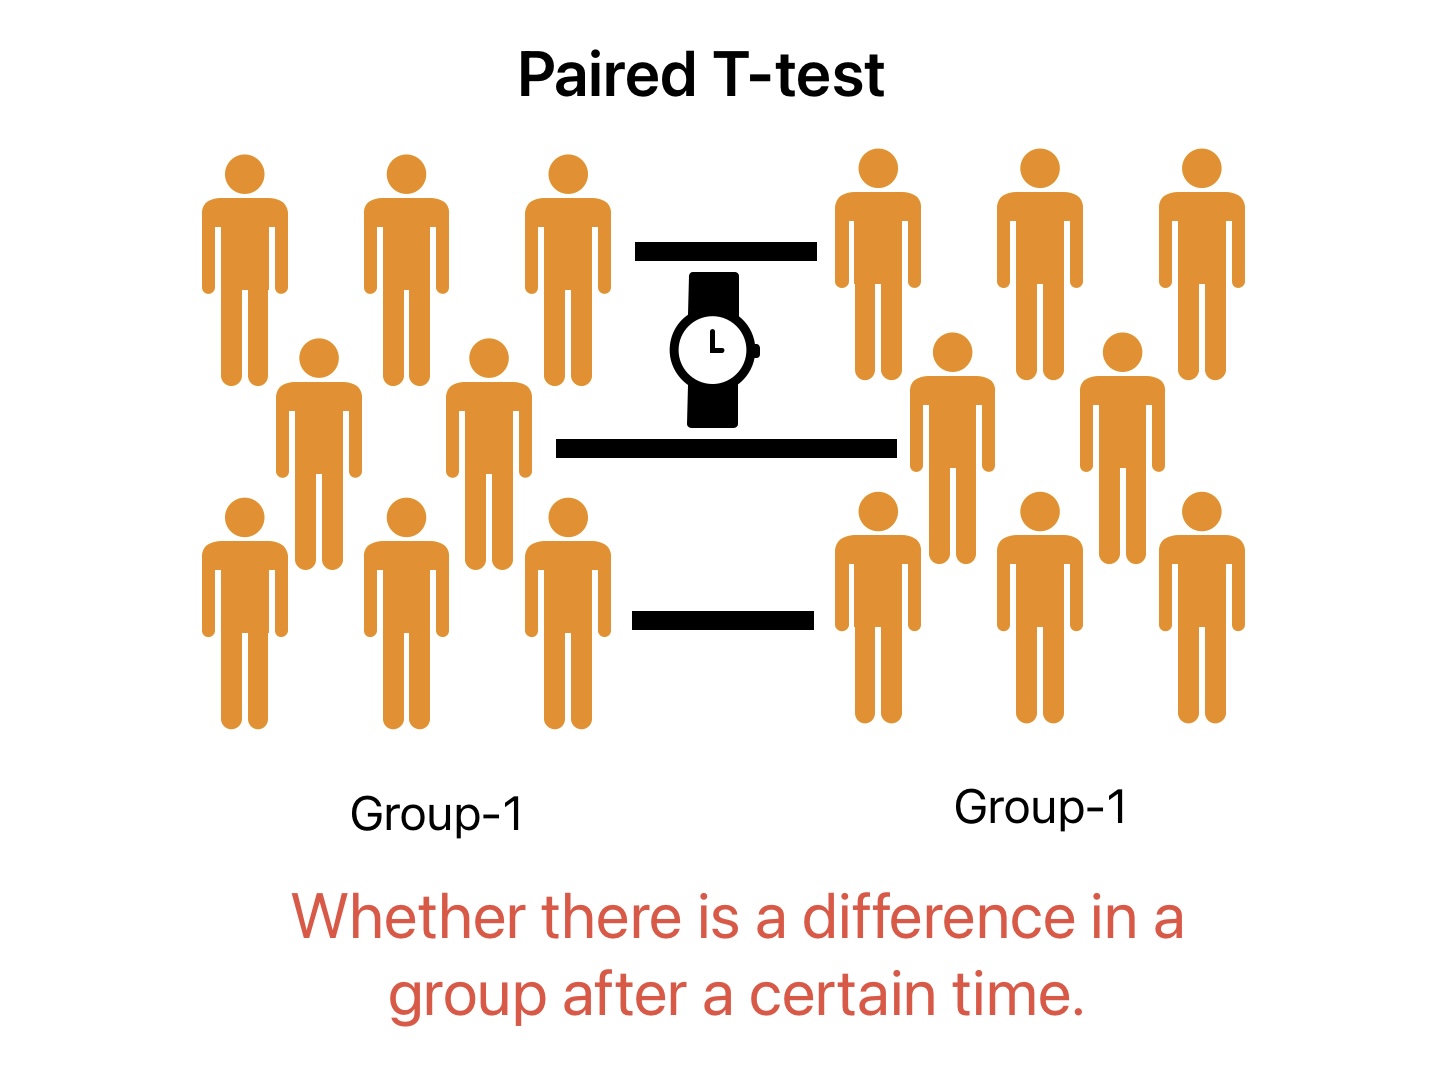 This image shows Paired t test representation